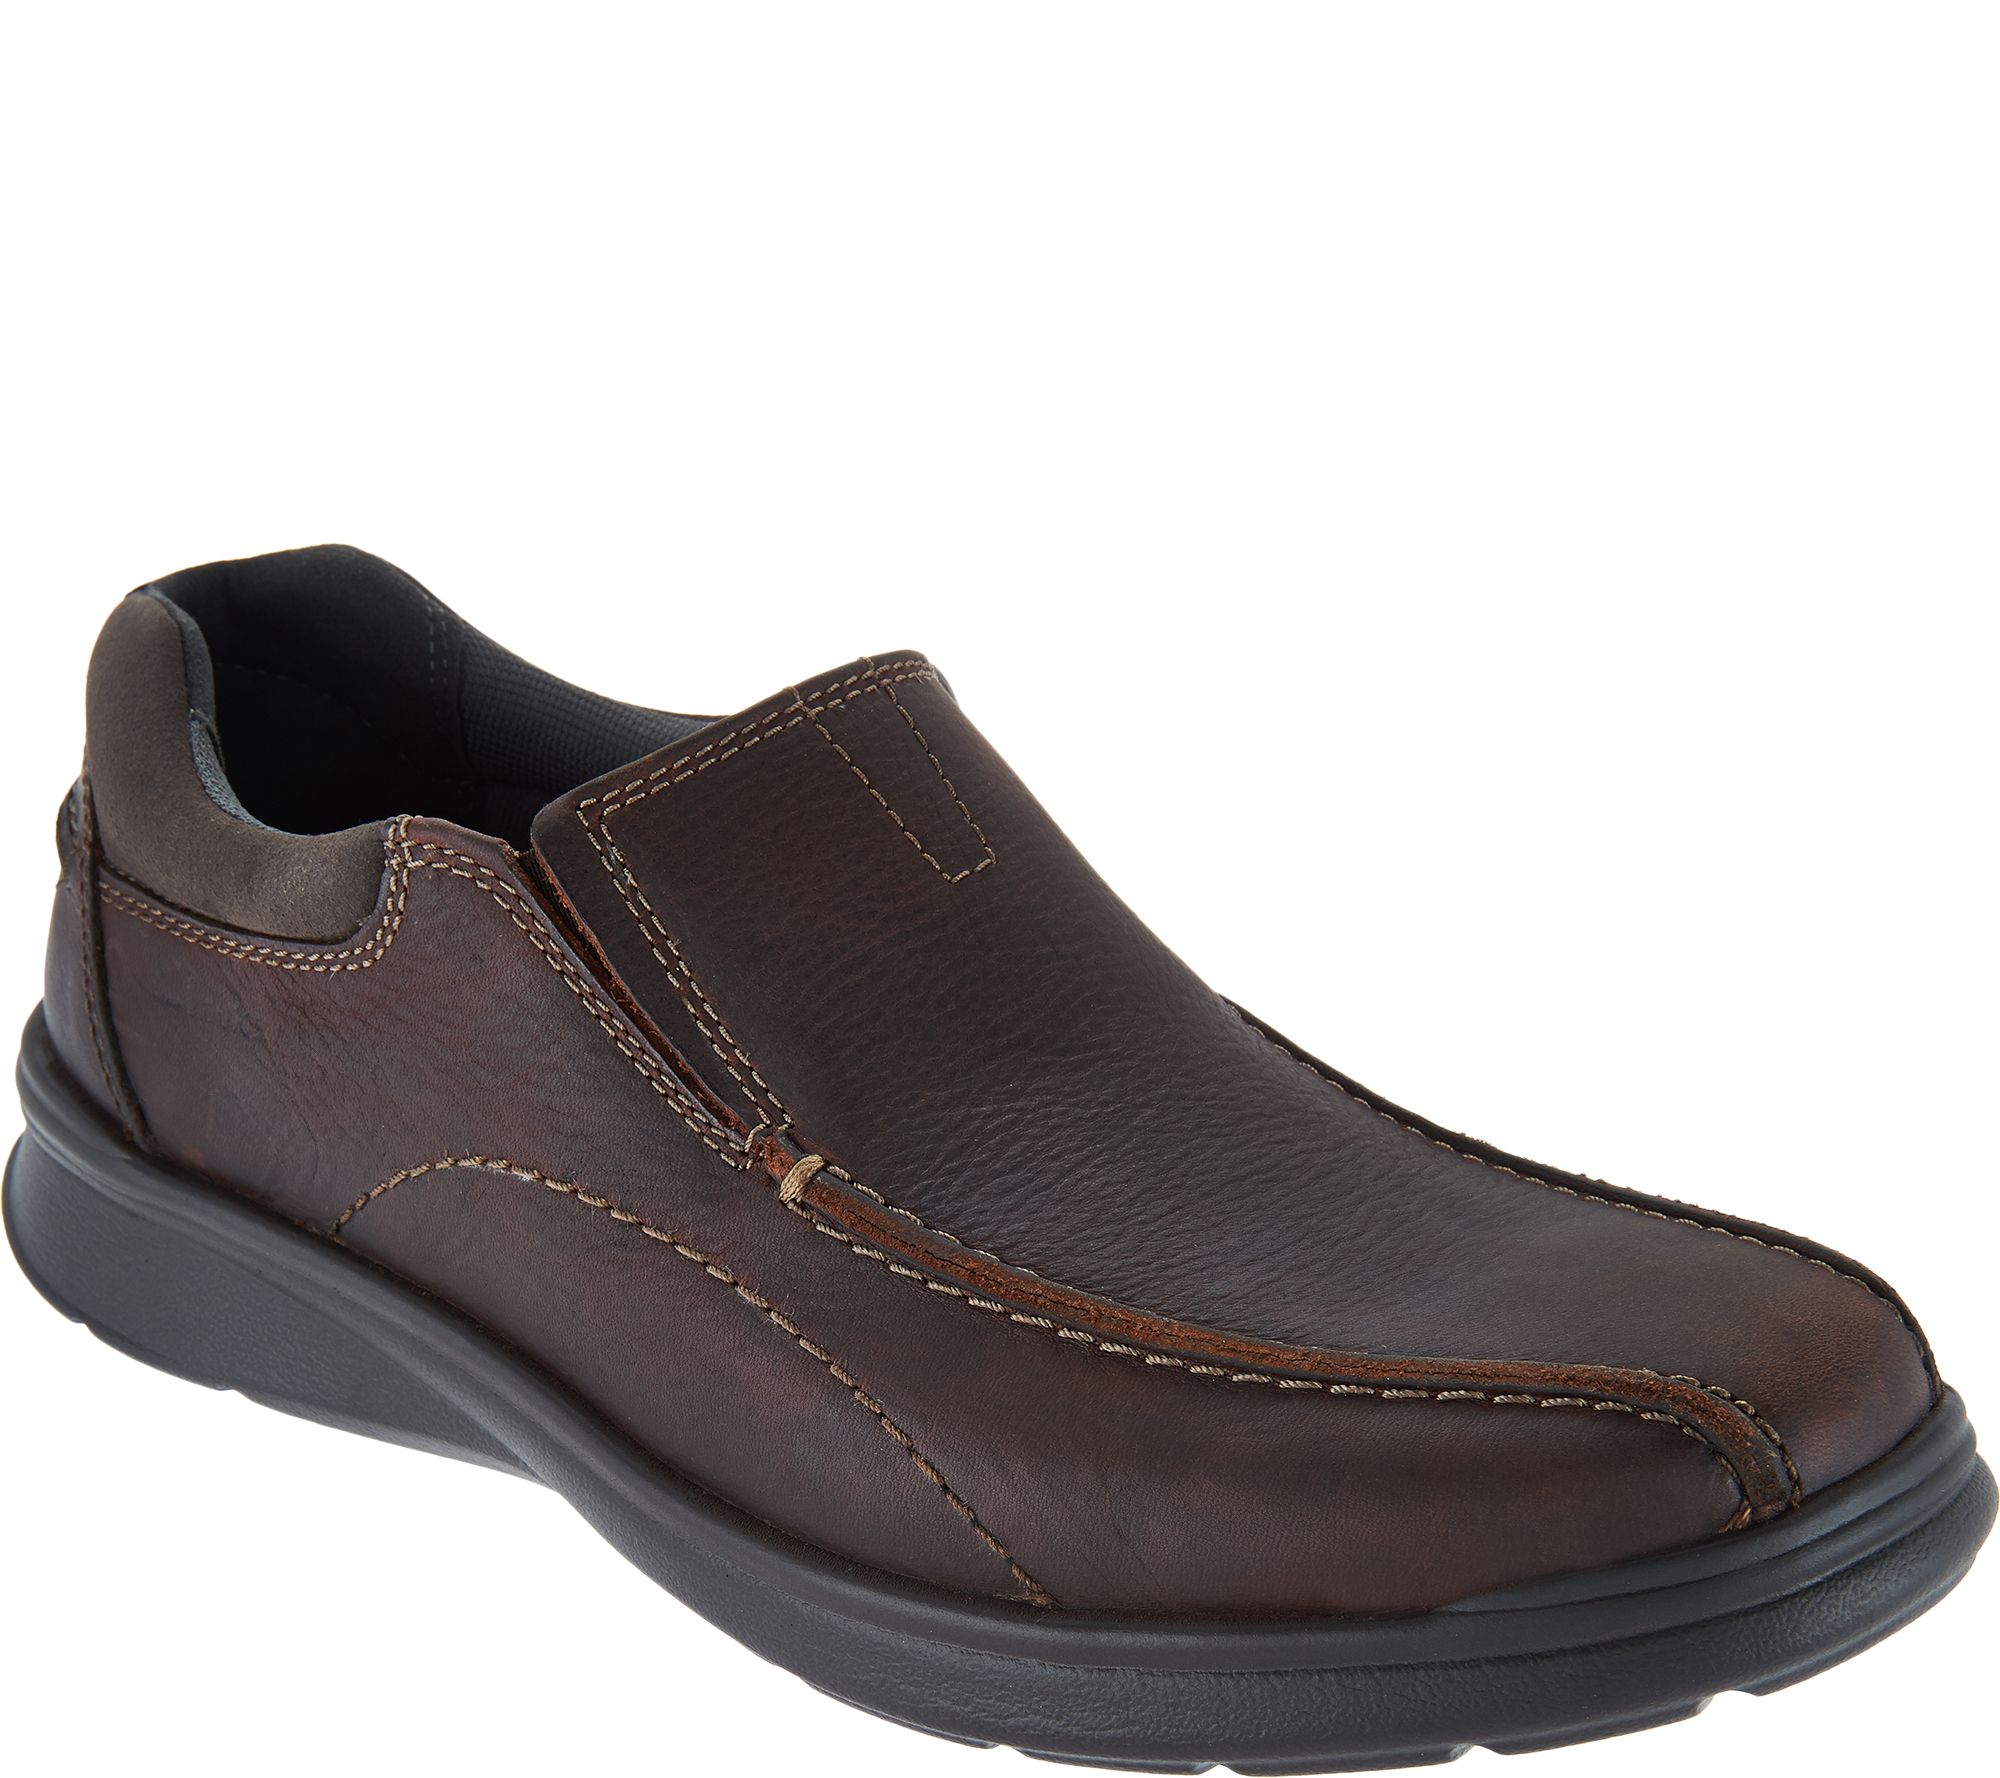 Leather Slip-on Shoes - Cotrell Step 